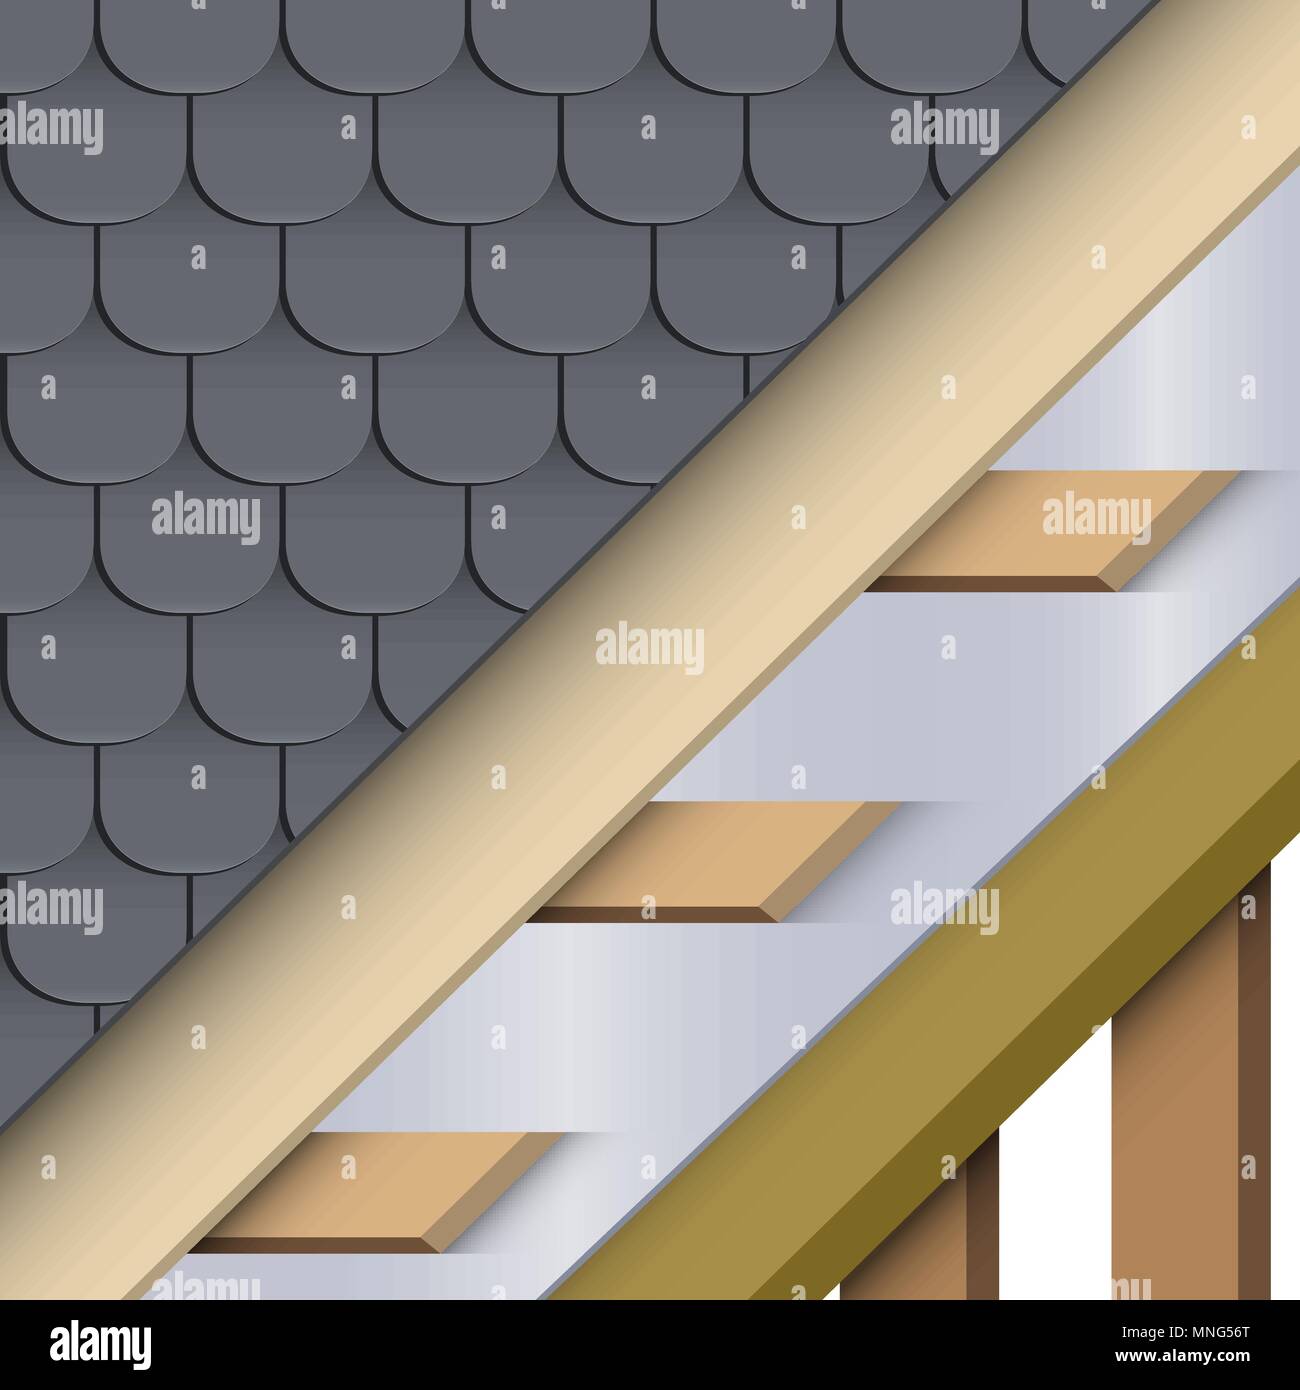 Bitumen shingles roofing cover and layers Stock Vector